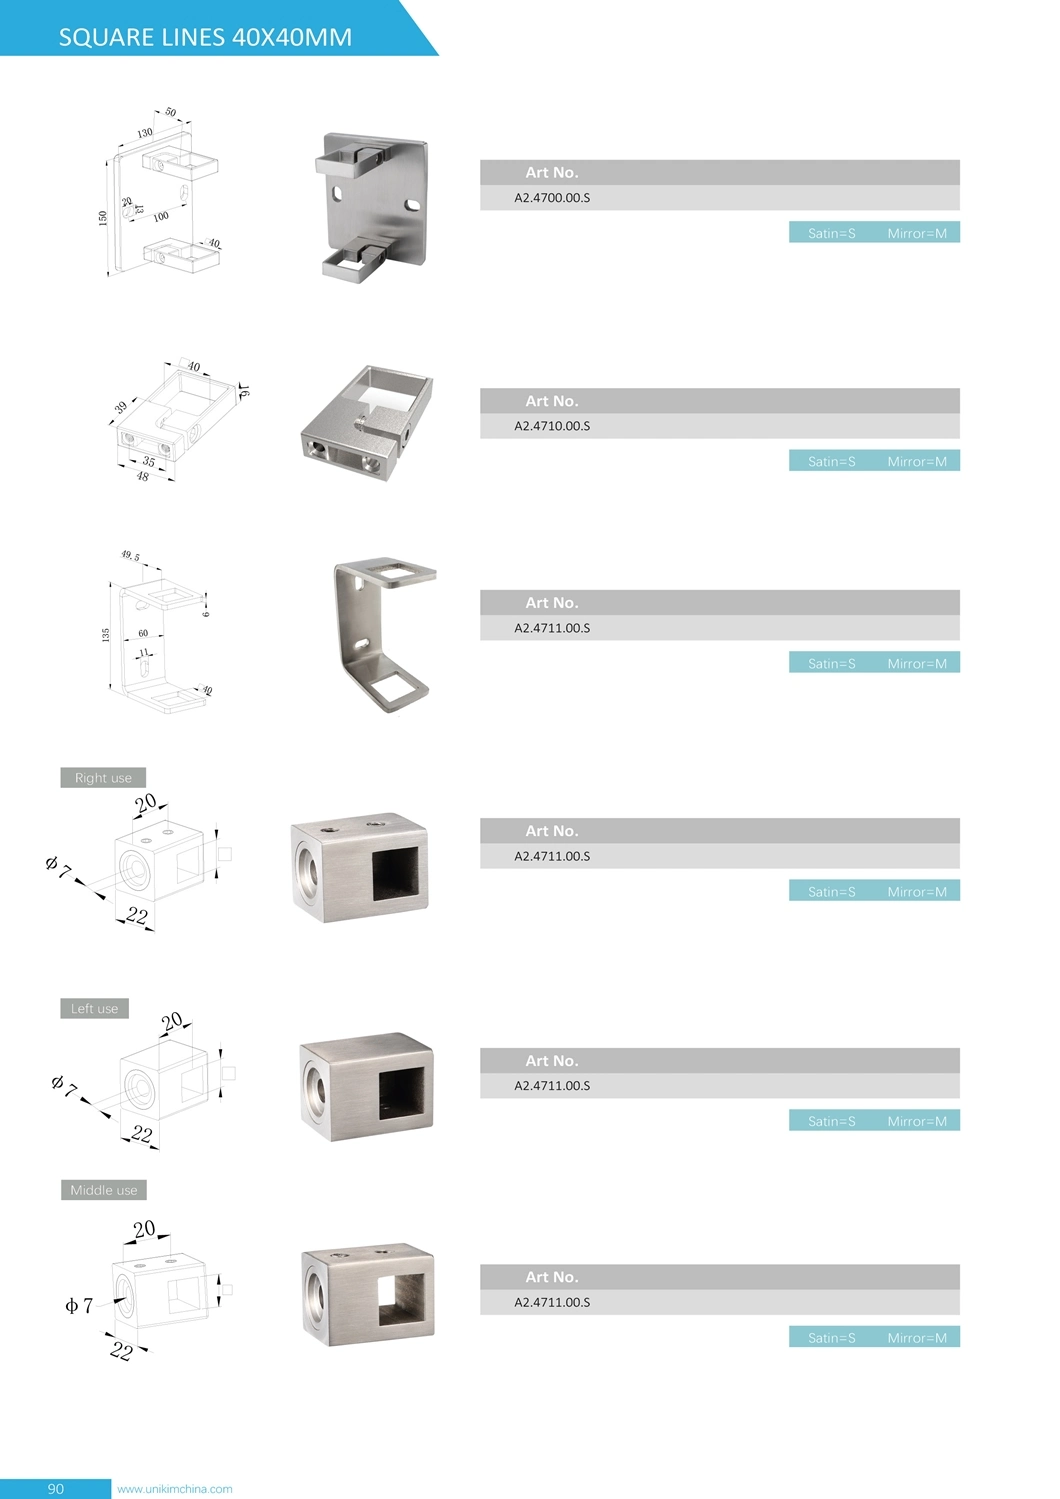 Factory Square Stainless Steel Ajustable Handrail Bracket for Stairs